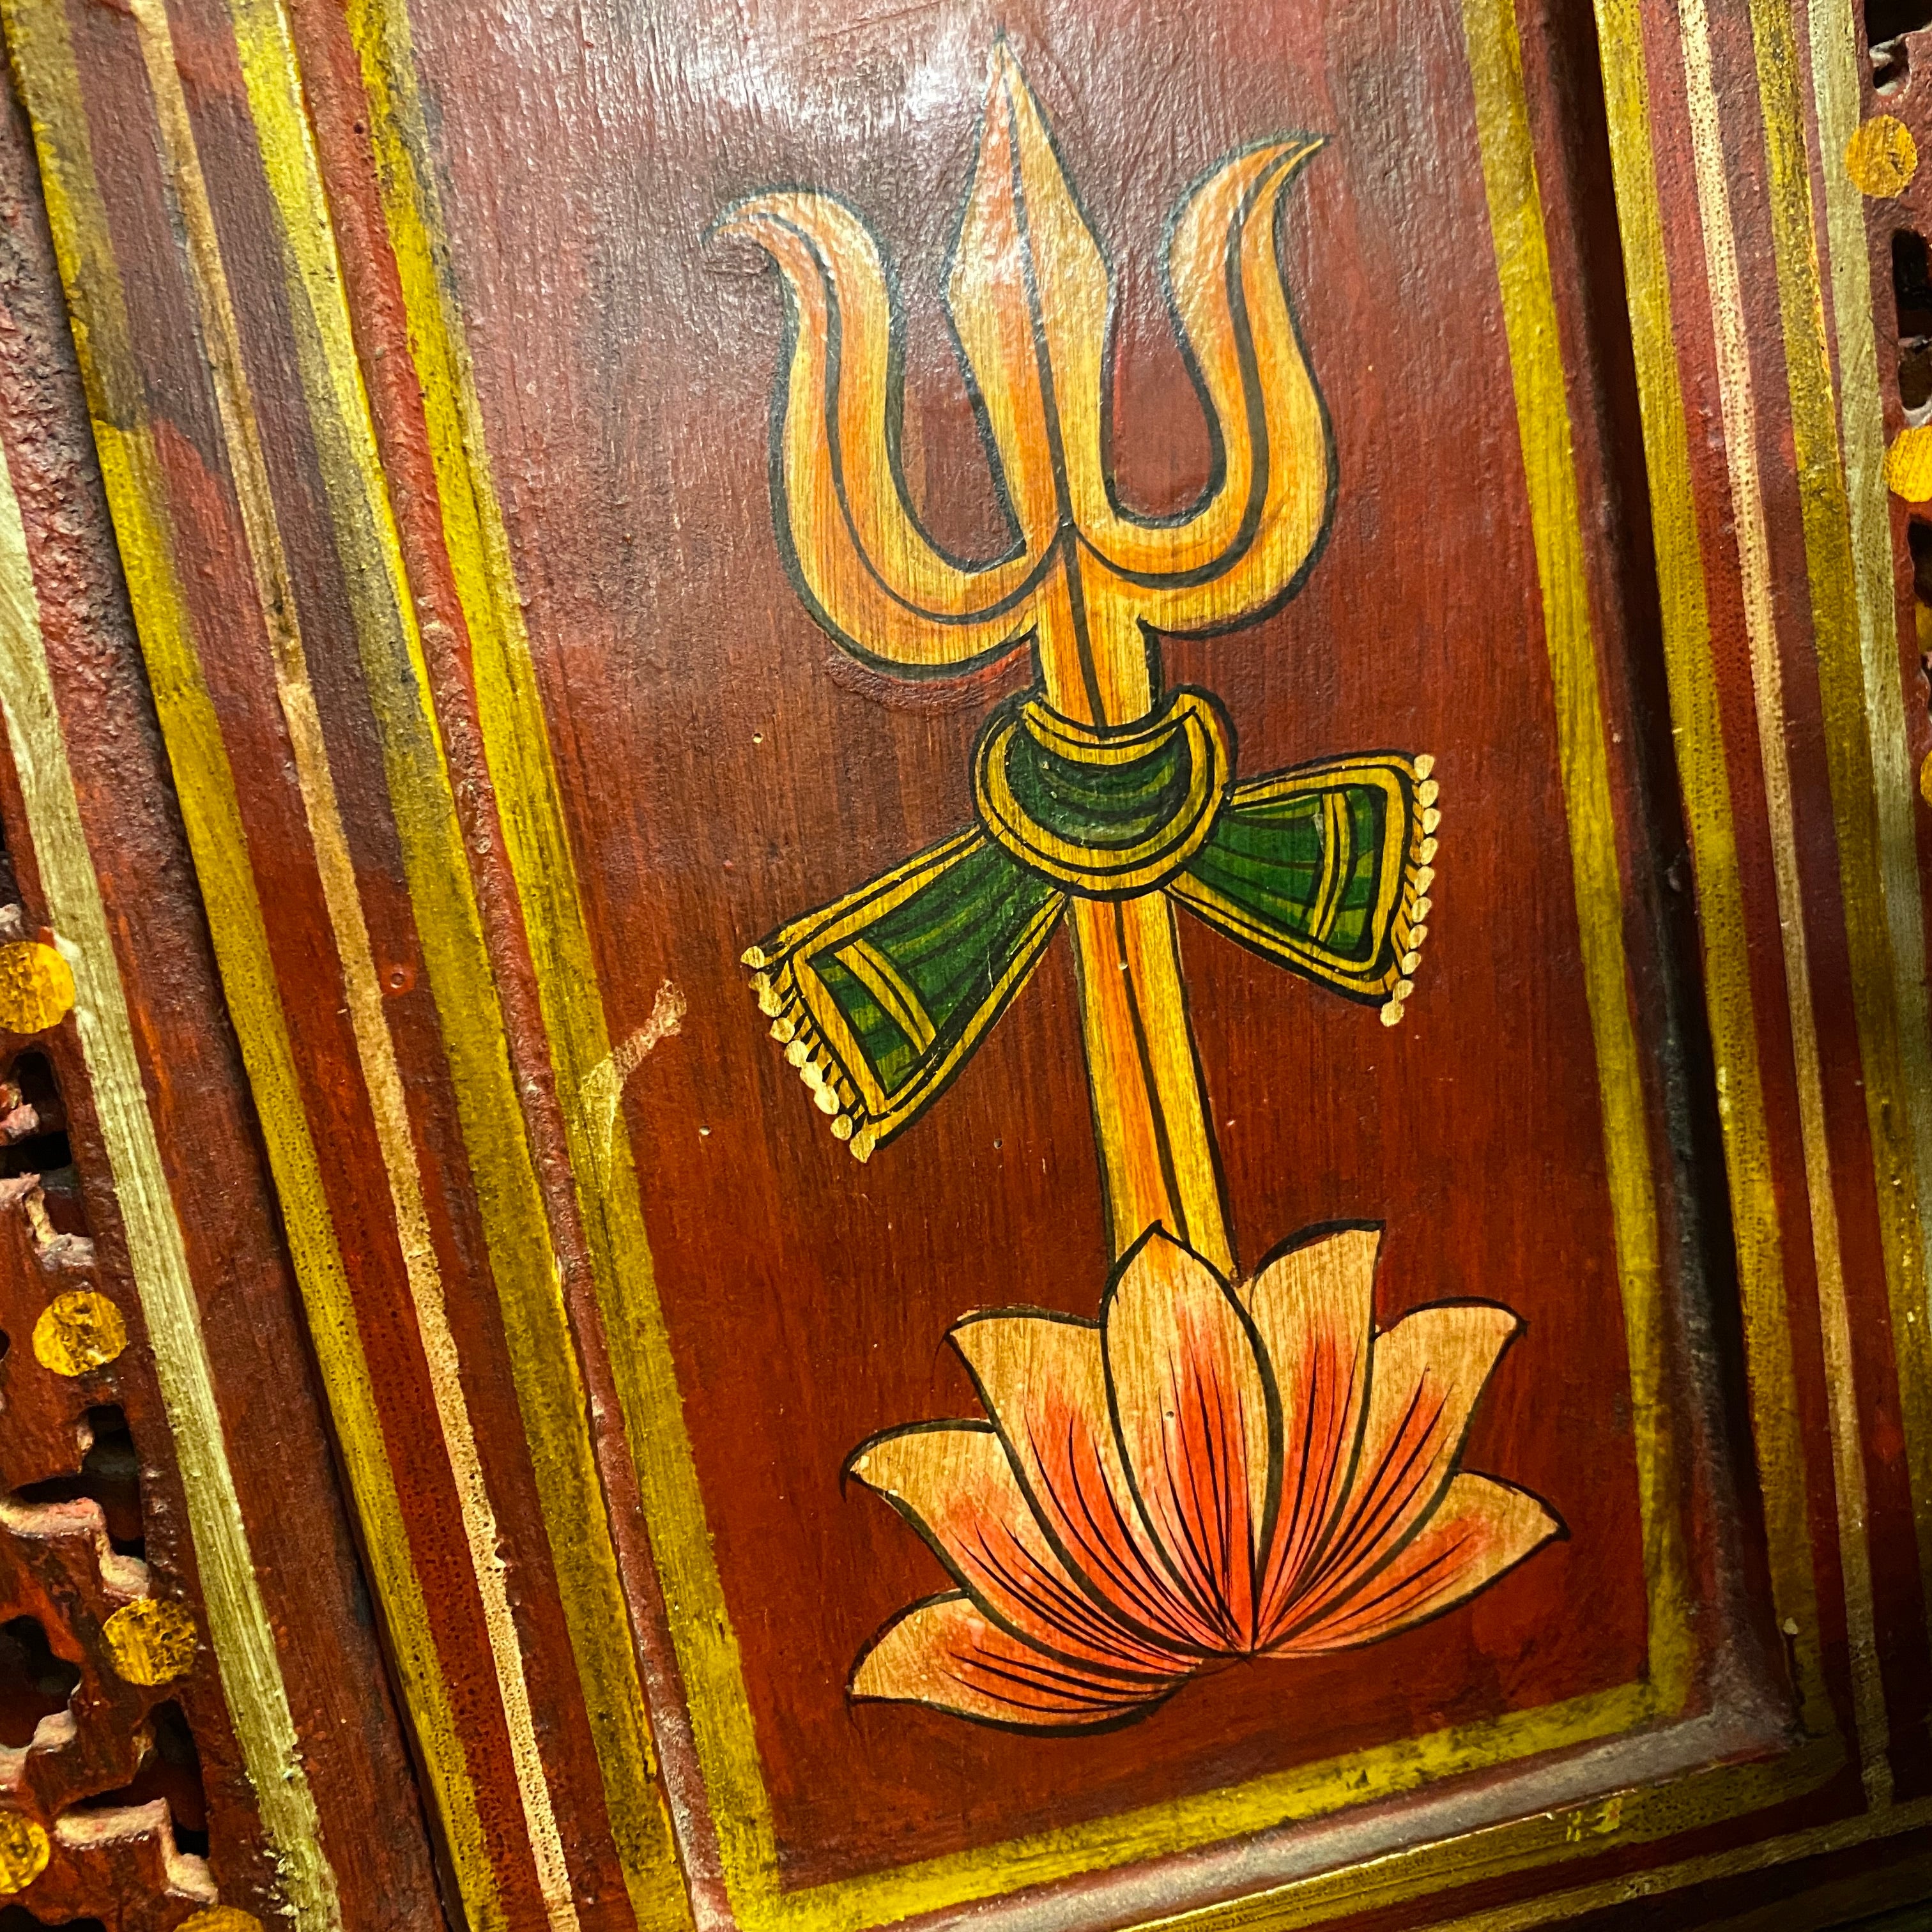 Hand Carved, Hand Painted Wooden Divider - Vintage India NYC